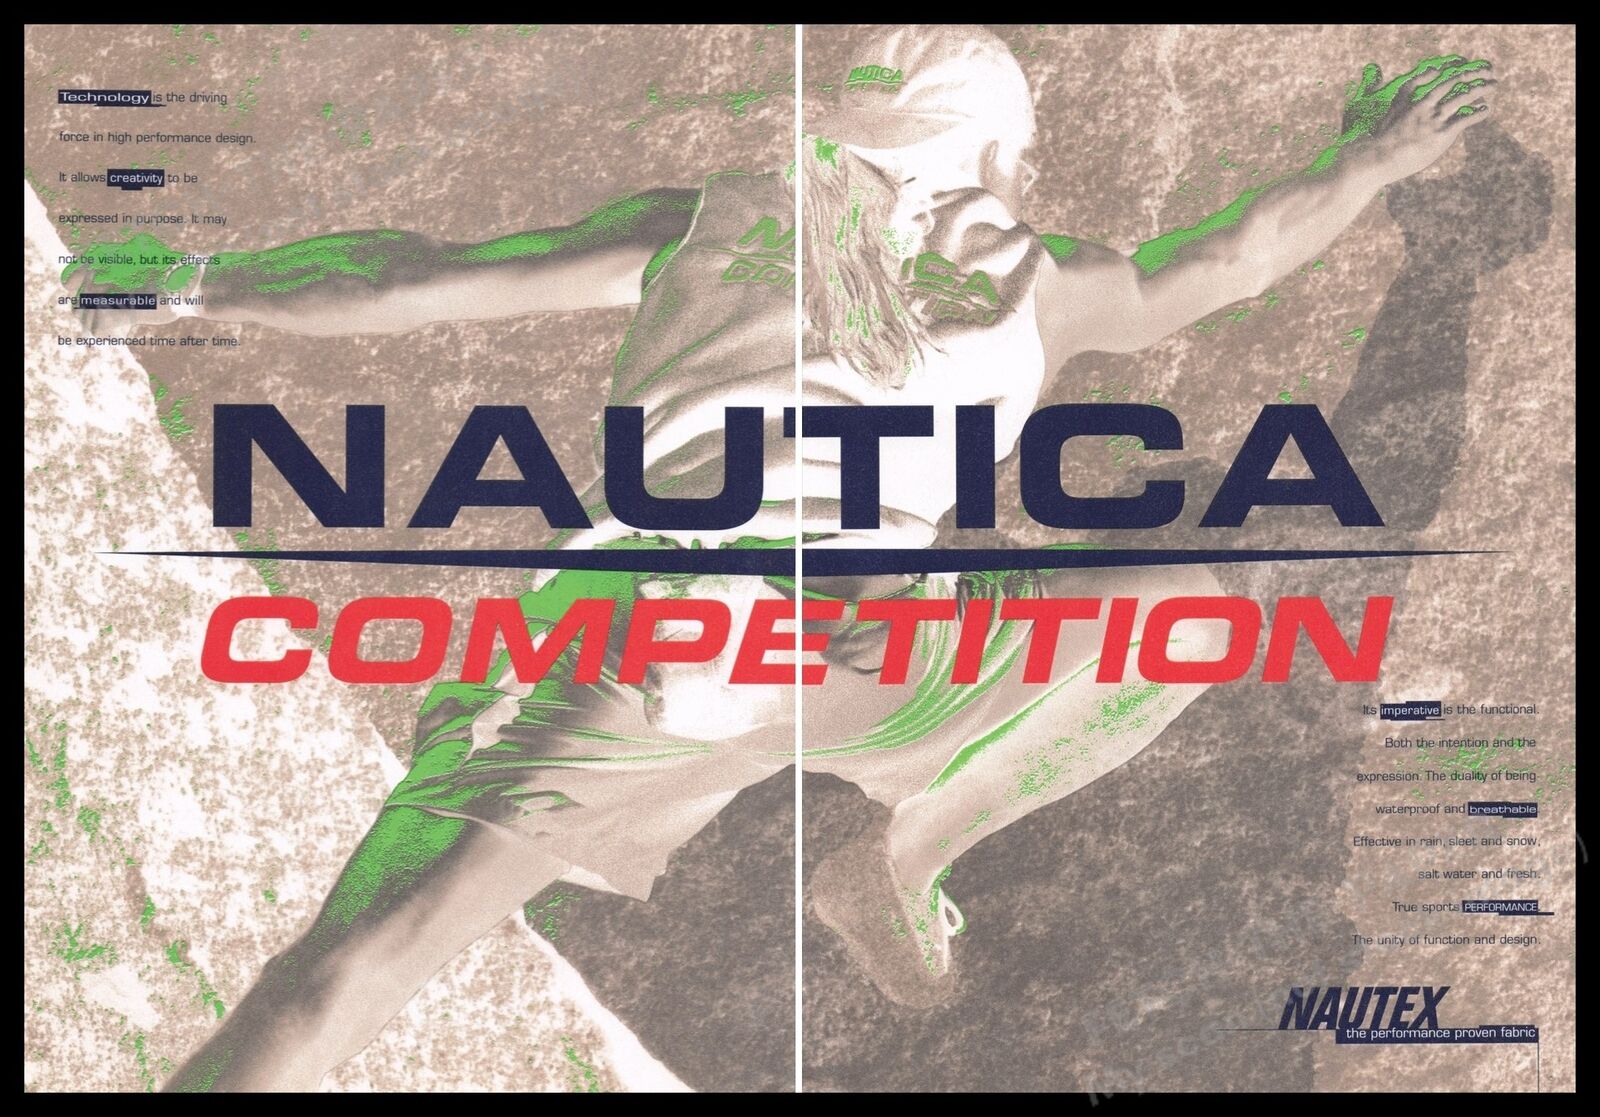 Nautica Competition 1990s Print Advertisement (2 pages) 1997 Rock Climbing